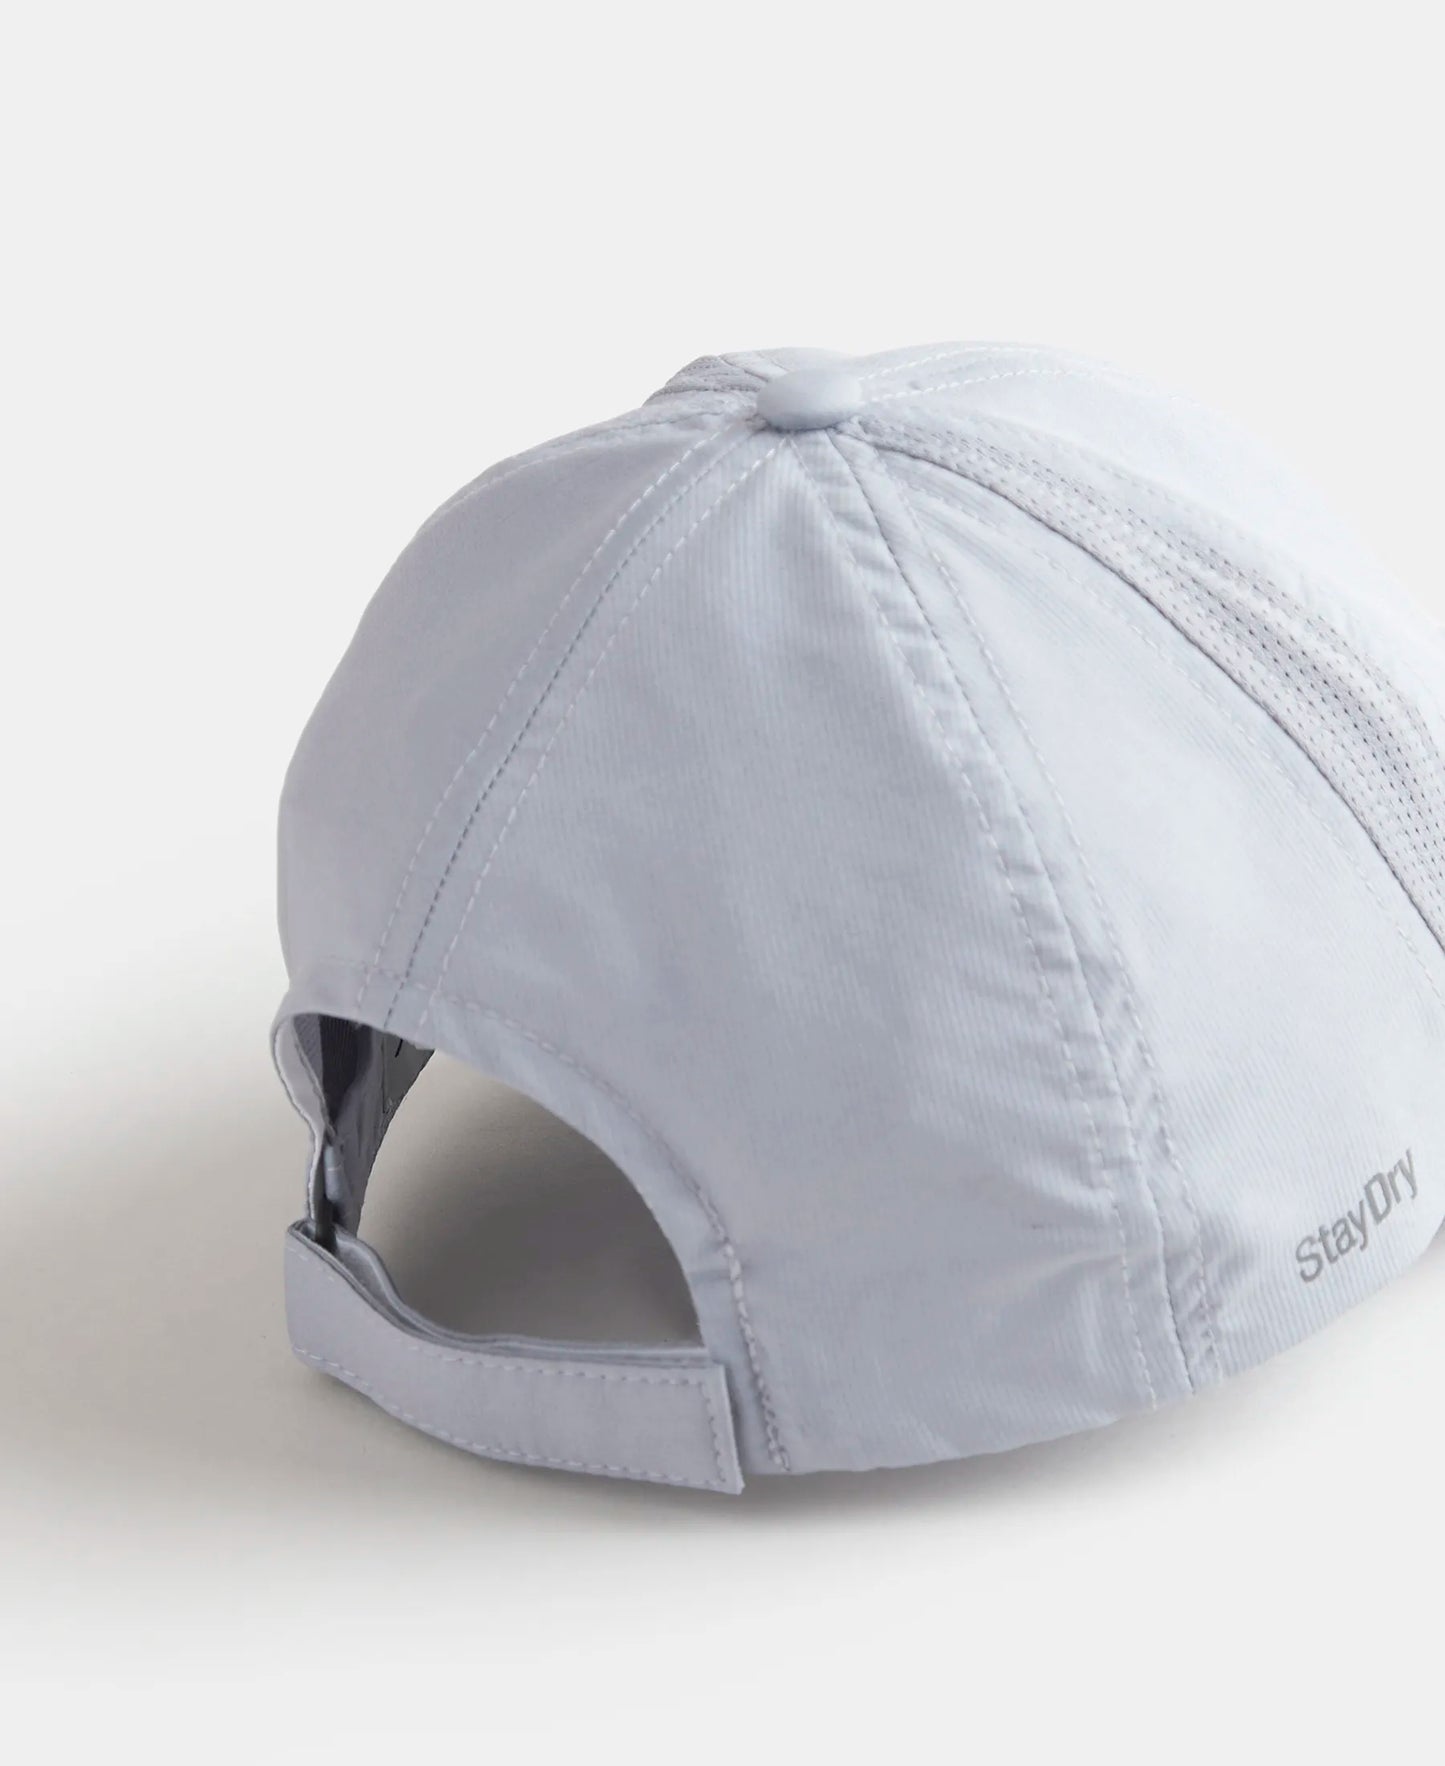 Polyester Solid Cap with Adjustable Back Closure and StayDry Technology - Light Grey-3